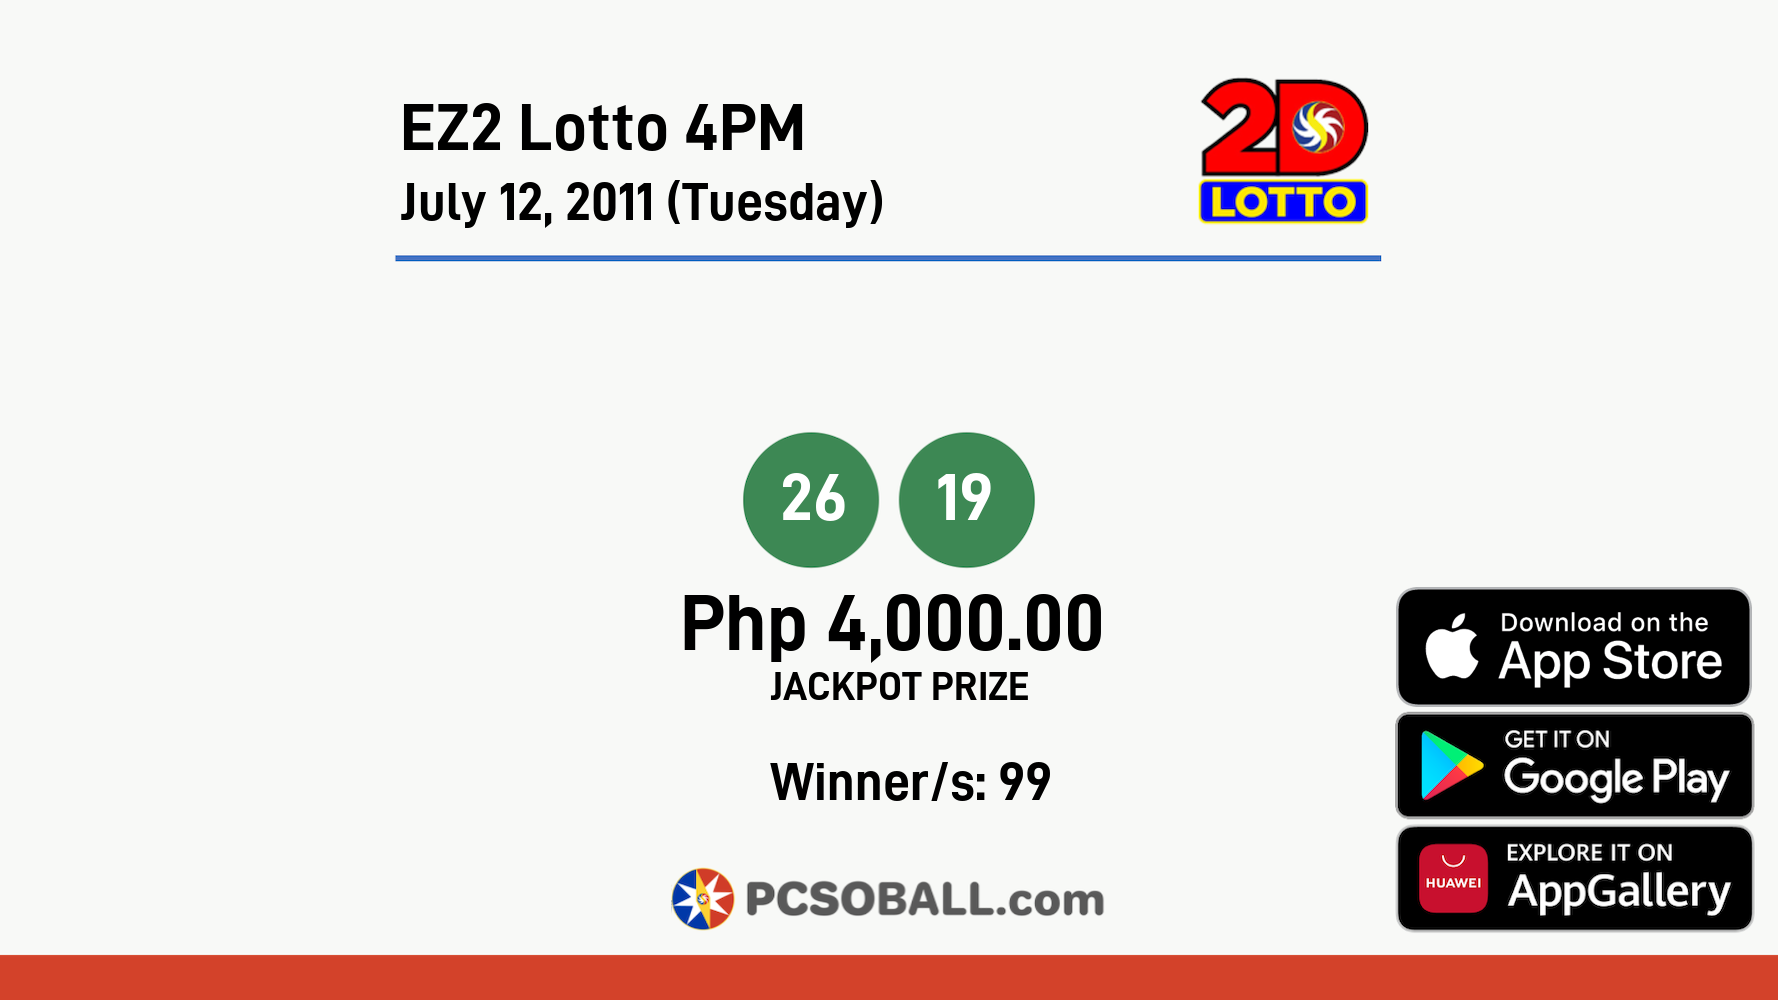 EZ2 Lotto 4PM July 12, 2011 (Tuesday) Result